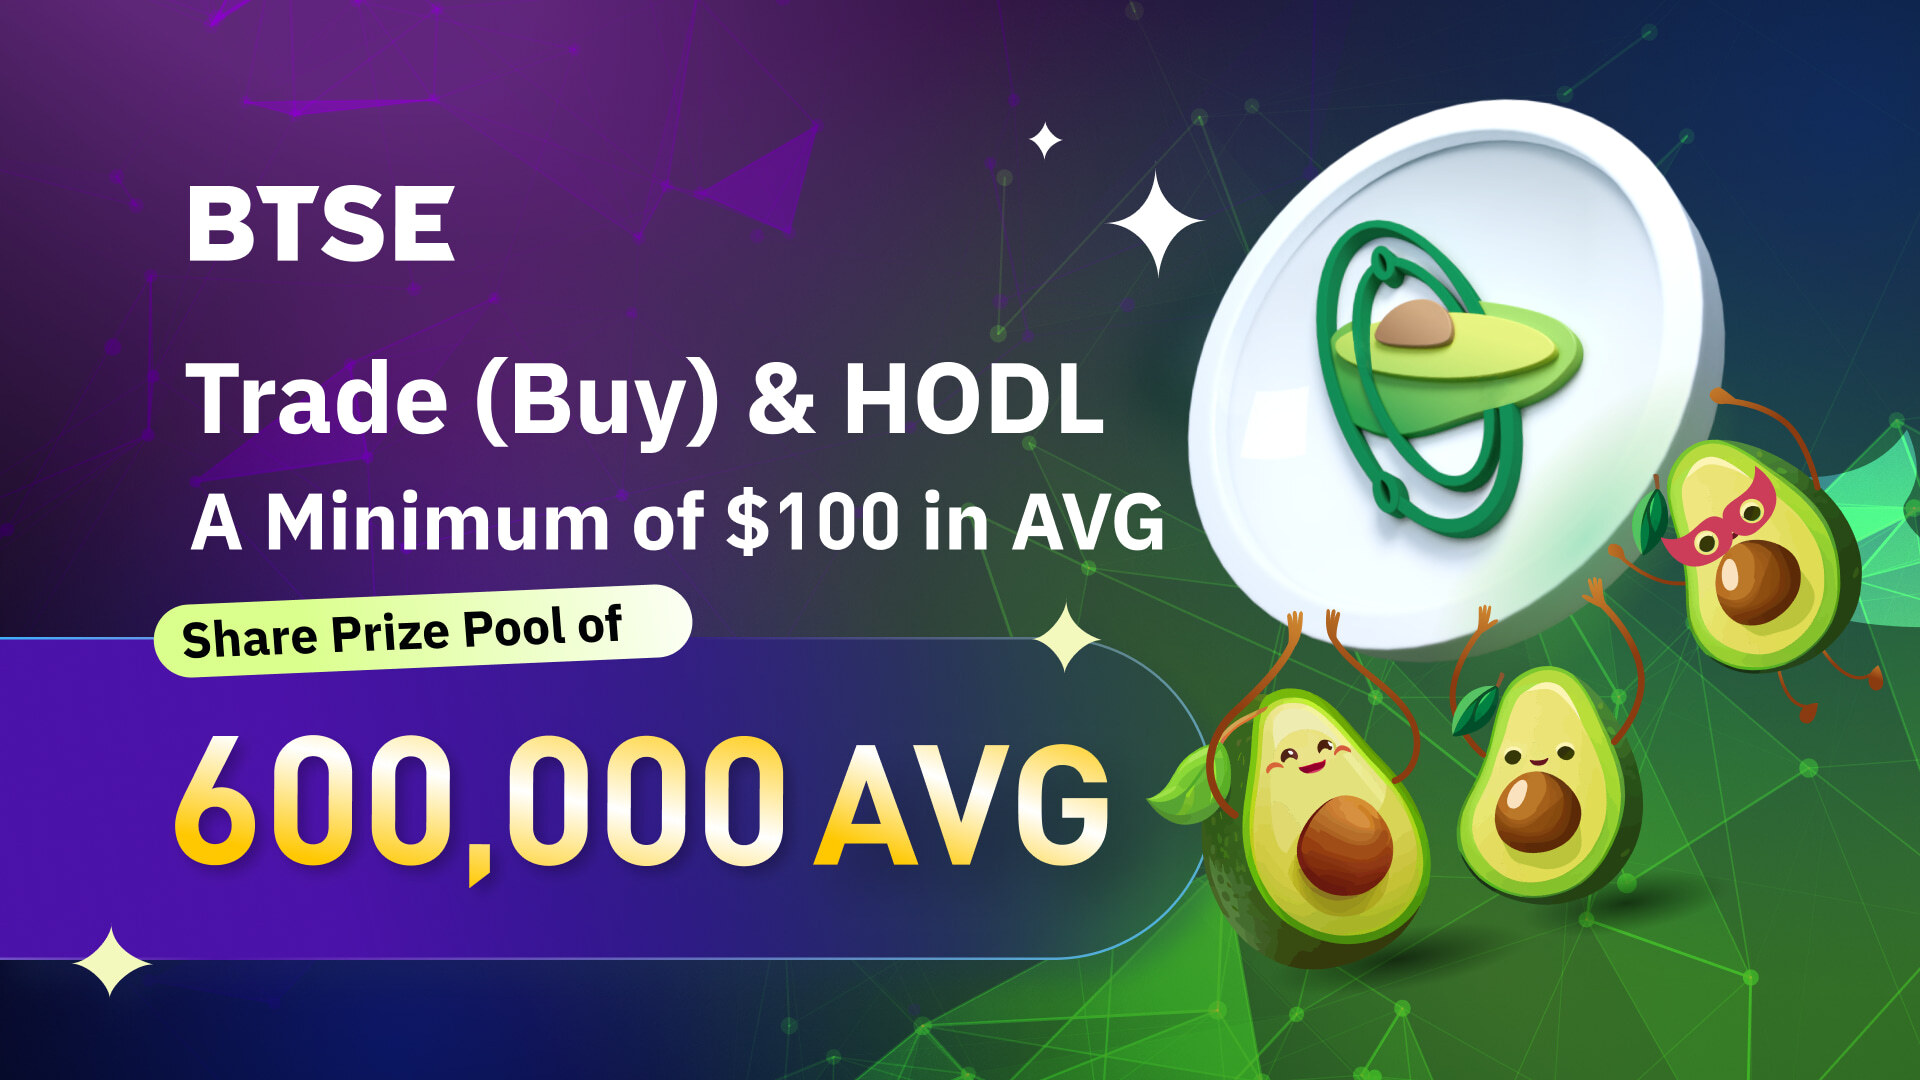 Buy and HODL to Share 600,000 AVG!